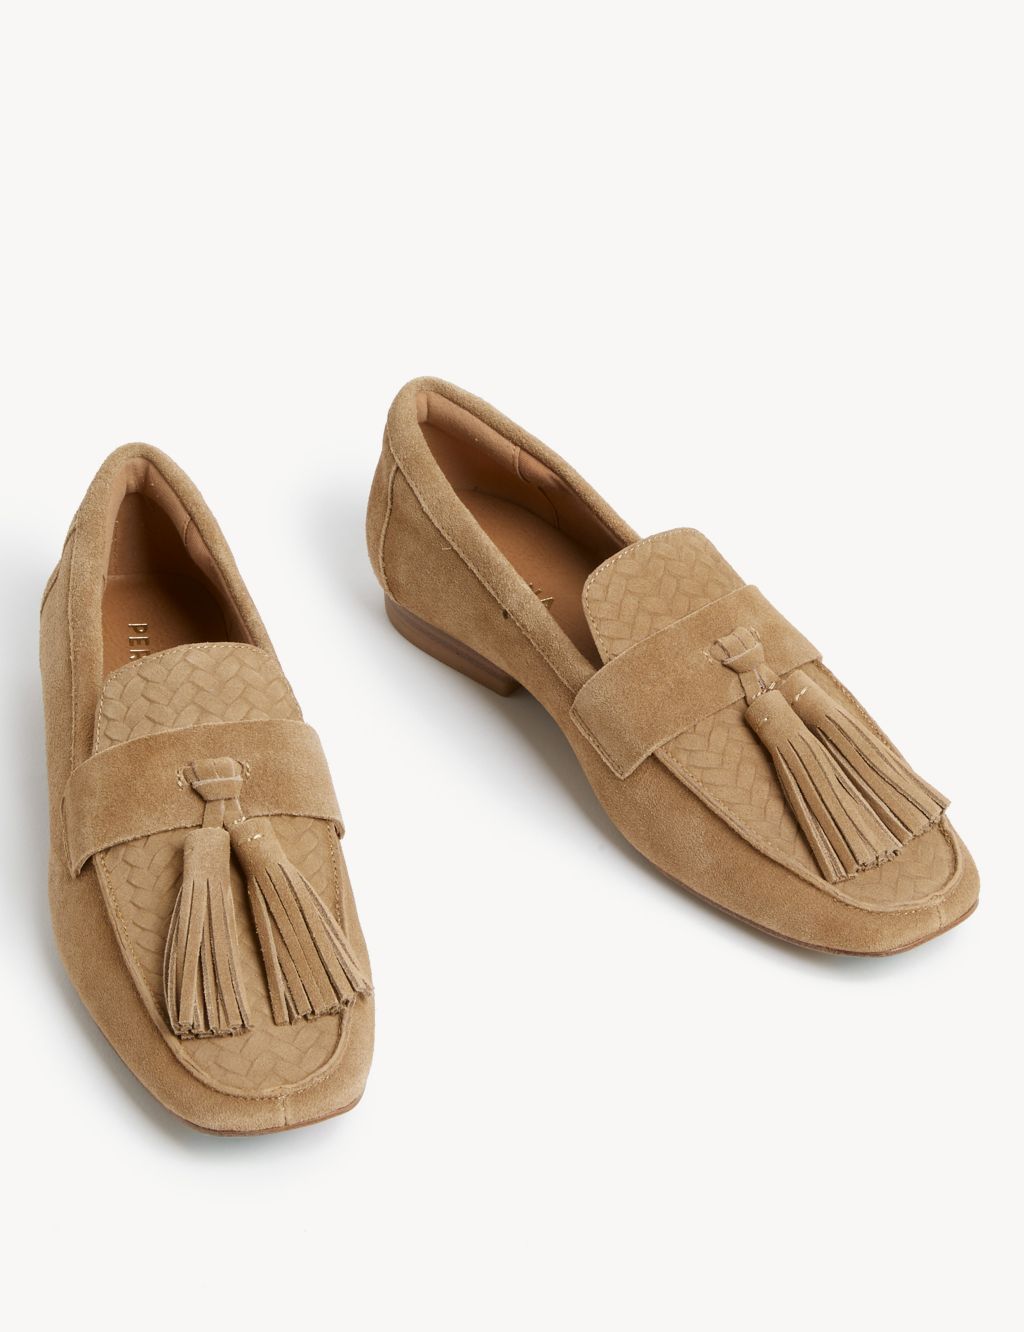 Suede Tassel Flat Loafers image 2